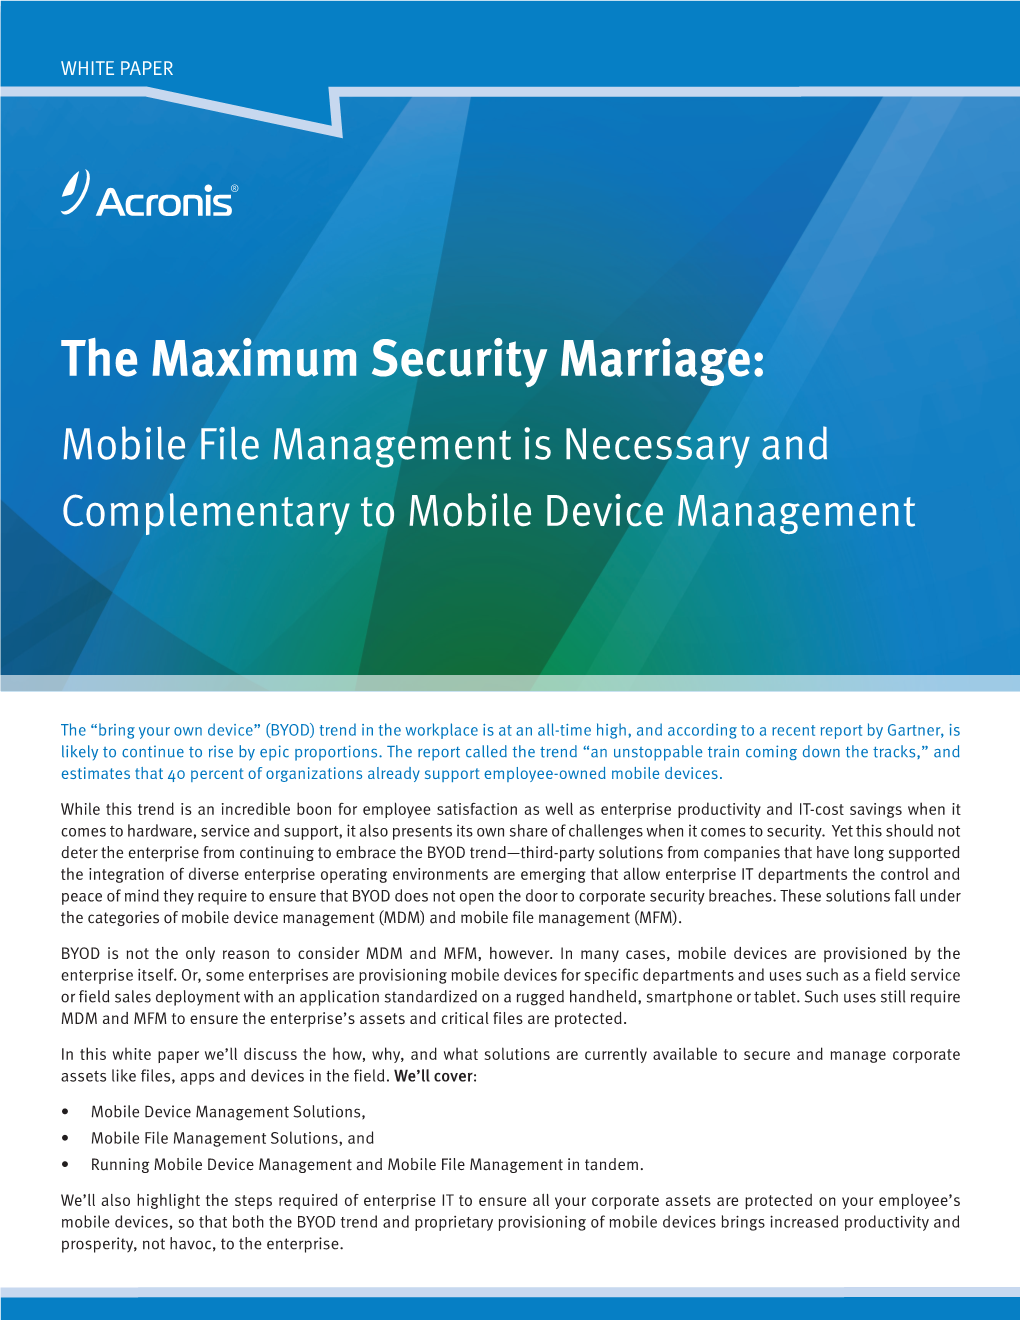 The Maximum Security Marriage: Mobile File Management Is Necessary and Complementary to Mobile Device Management